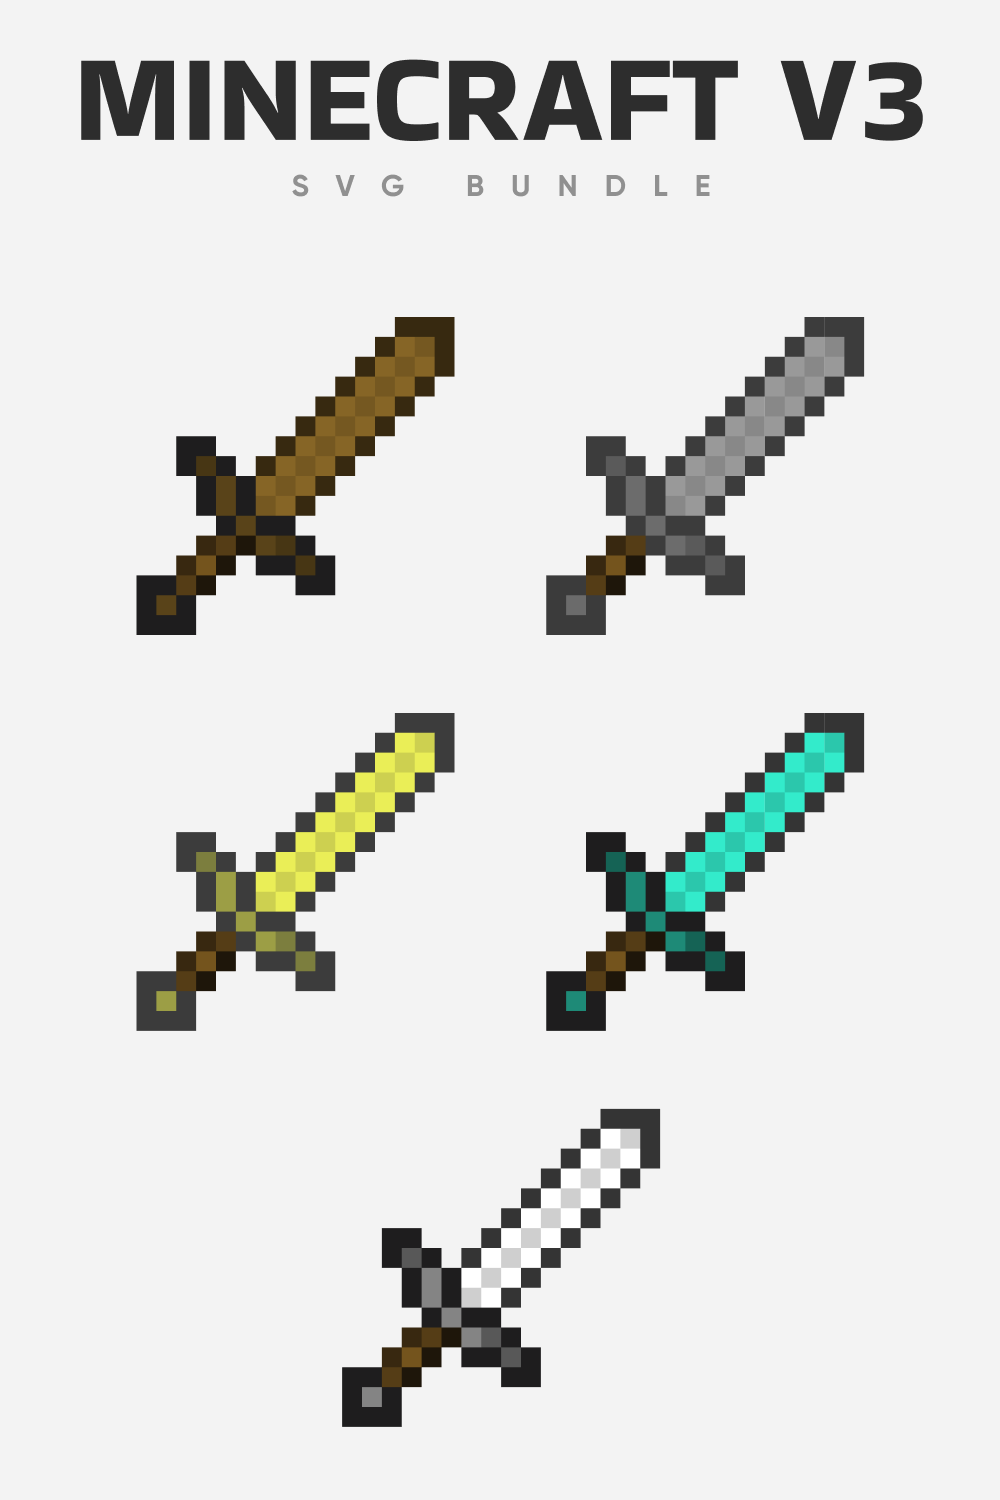 Different types of weapons in minecraft, metal, diamond, wood and others.